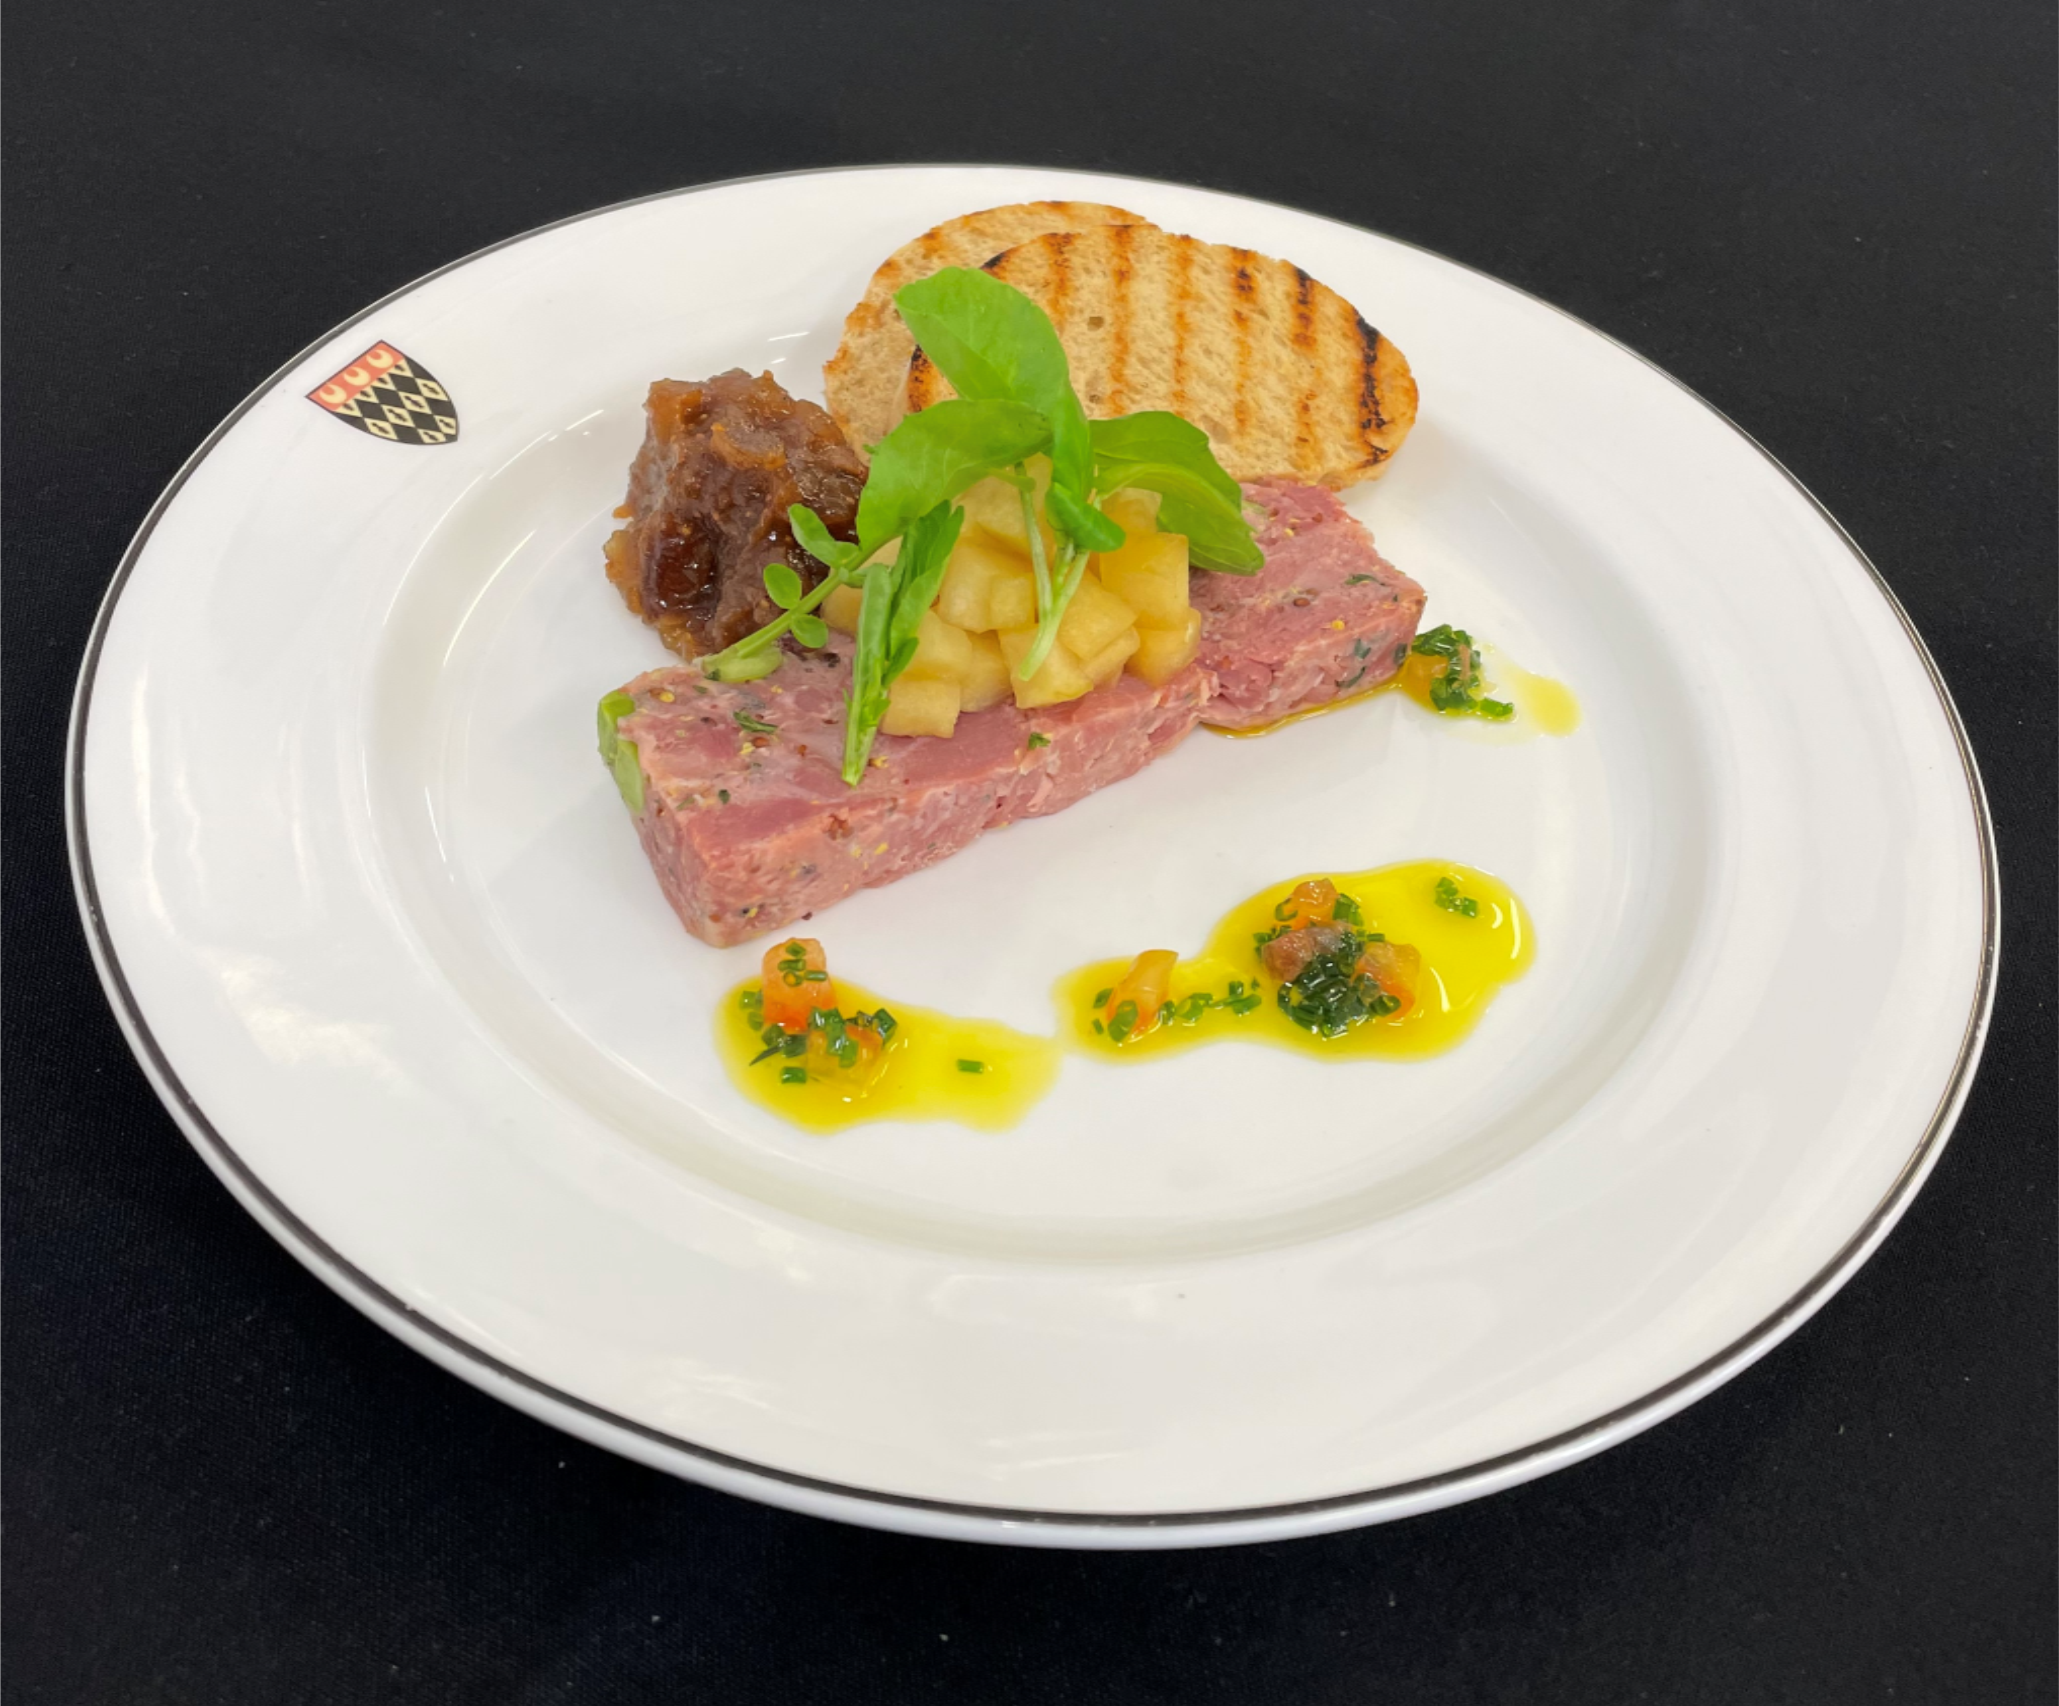 Pressed ham hock: with pea shoots served with a caramelised apple salad and sourdough croute